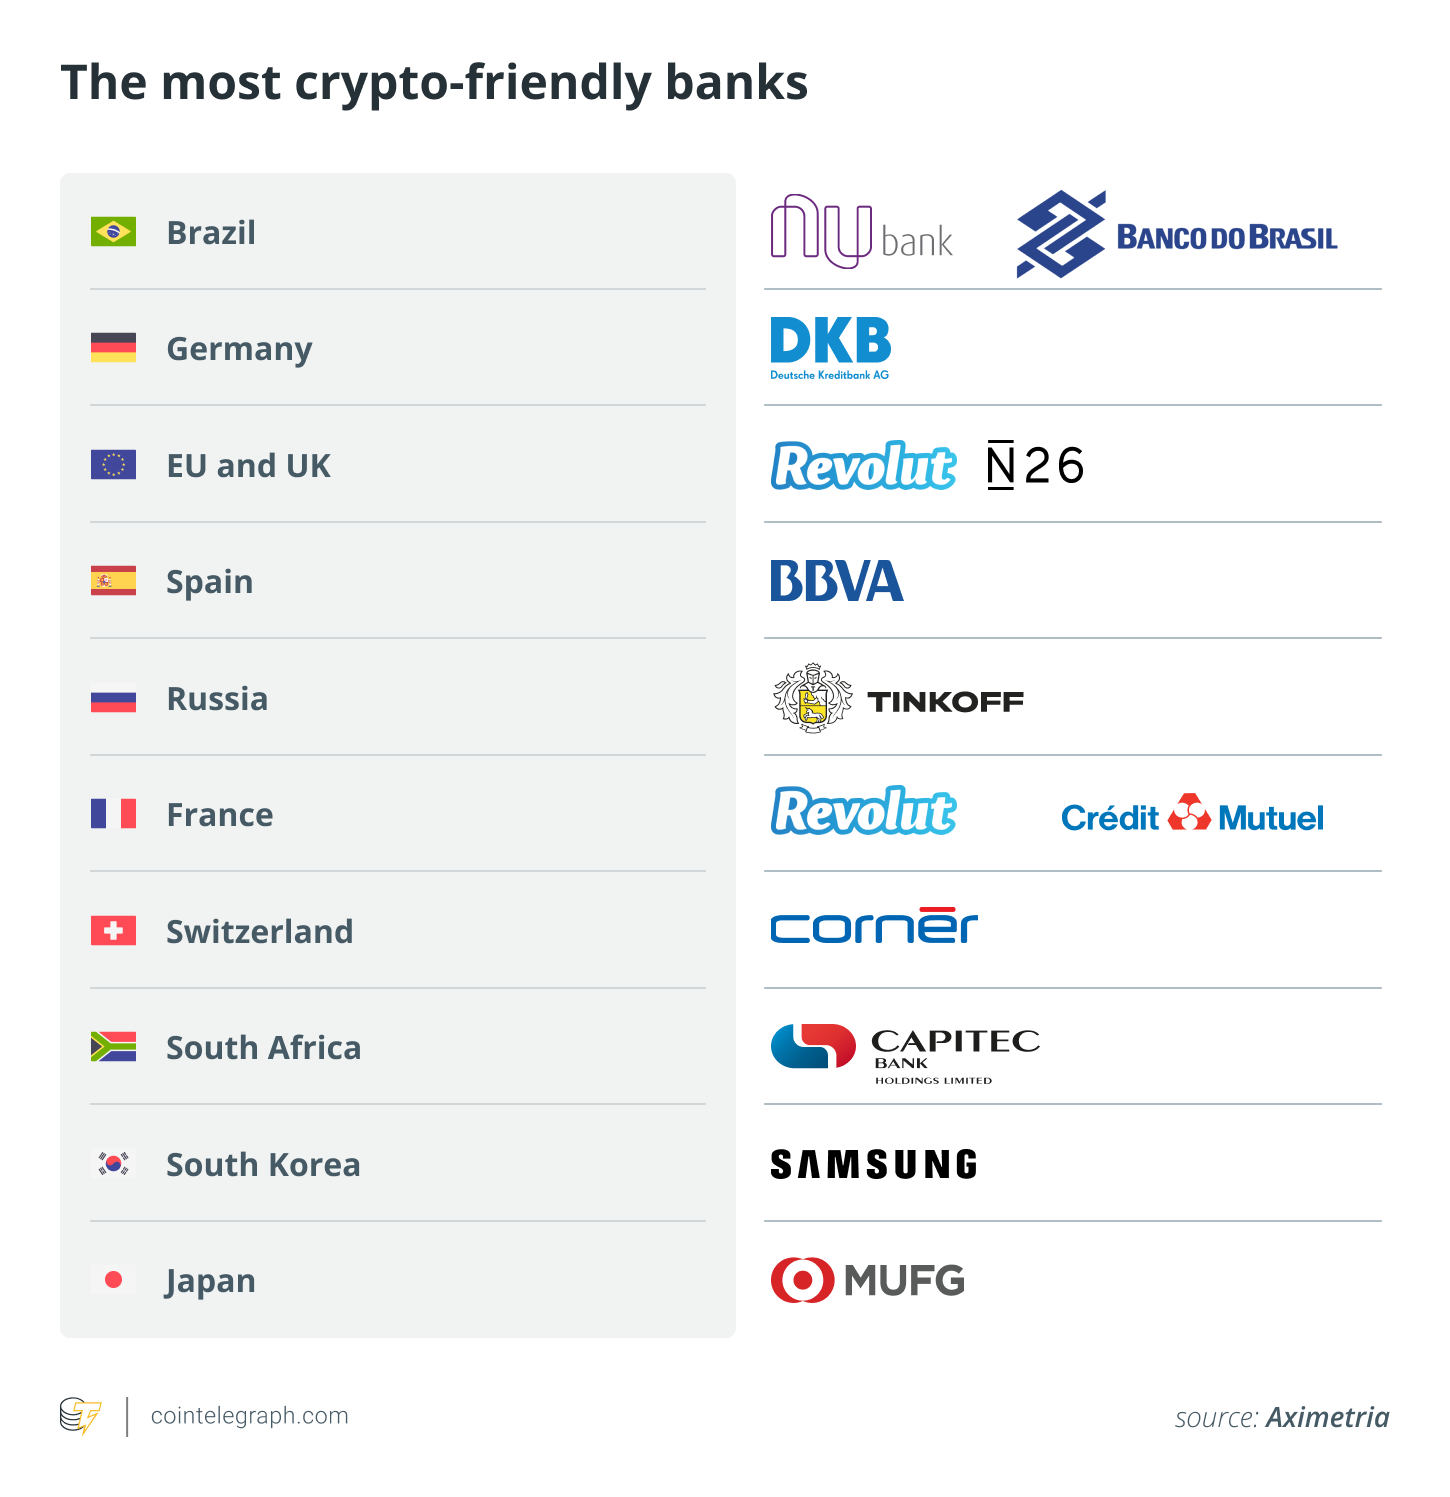 The most crypto-friendly banks